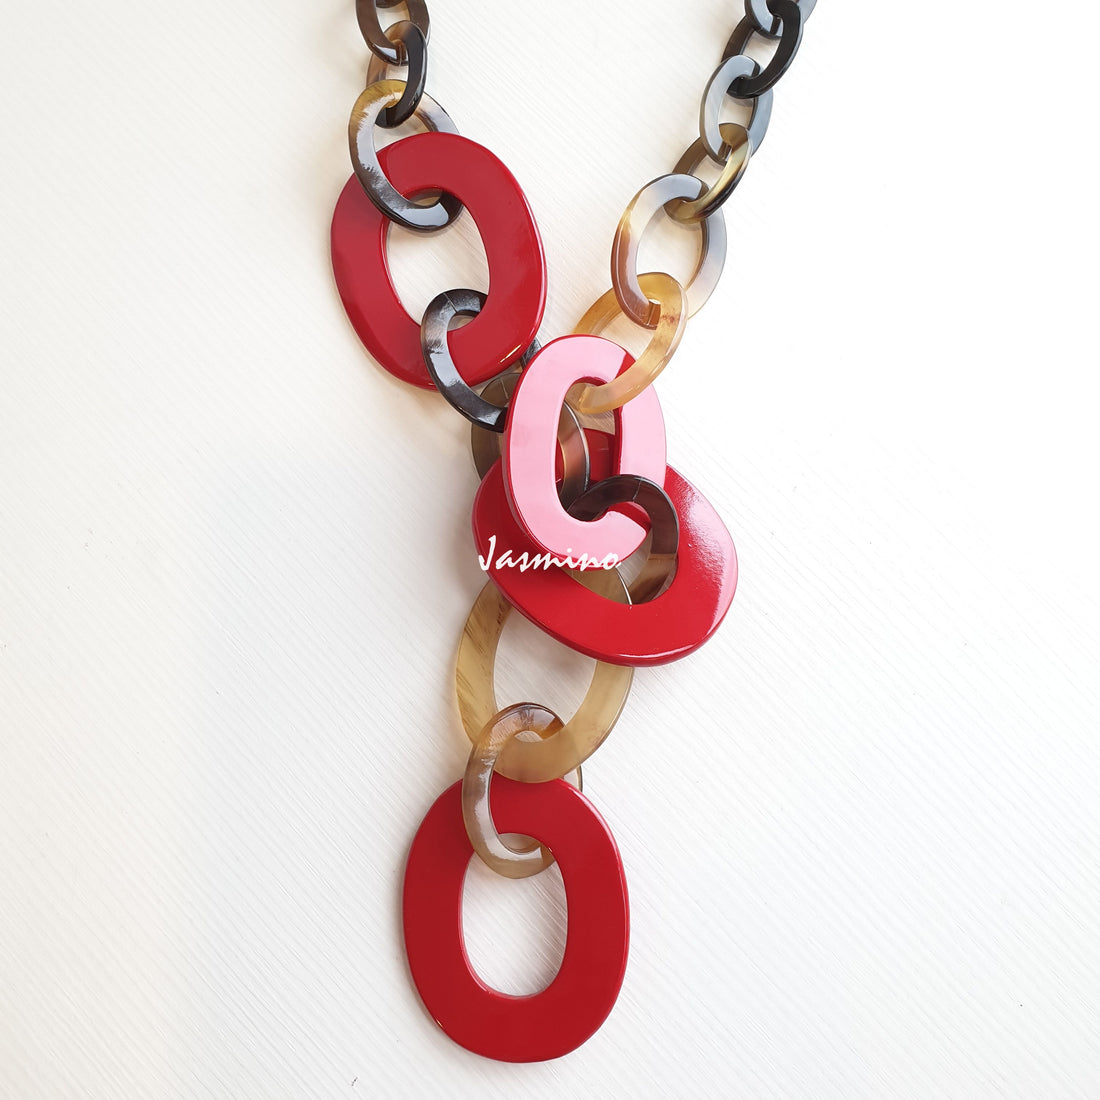 A wide chain necklace features natural buffalo horn and red color on a white background